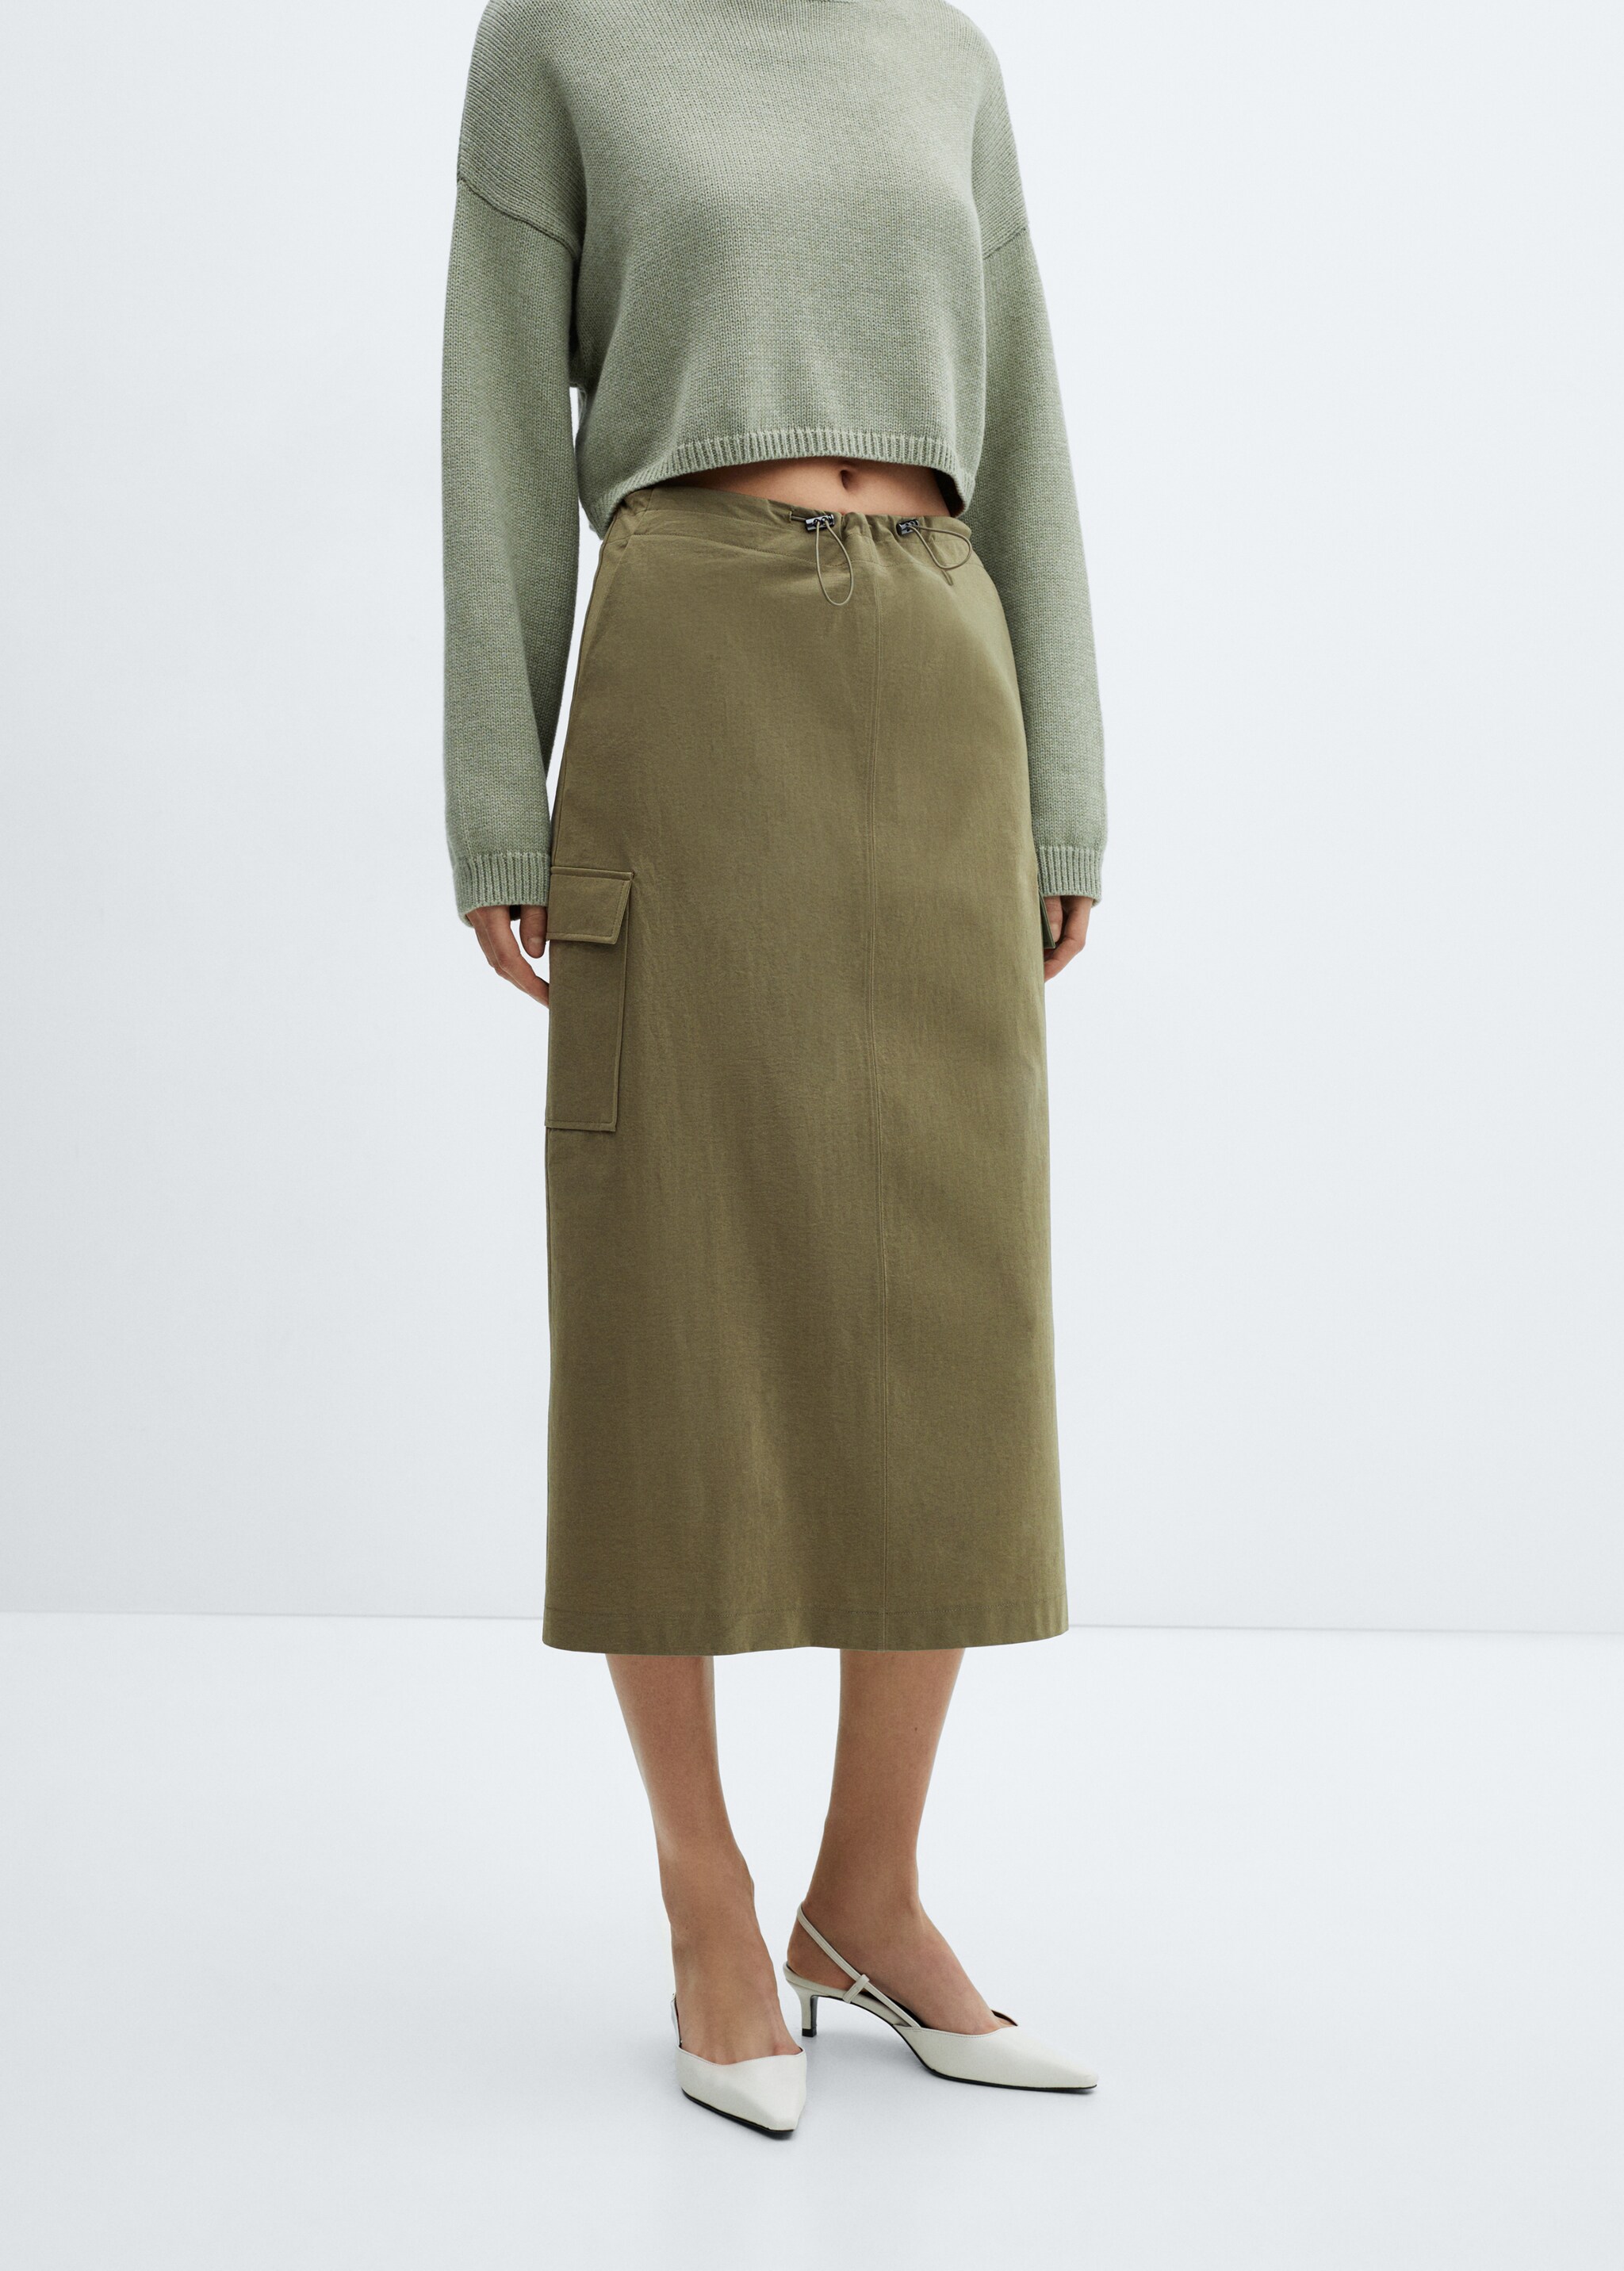 Midi skirt cargo pockets - Details of the article 6